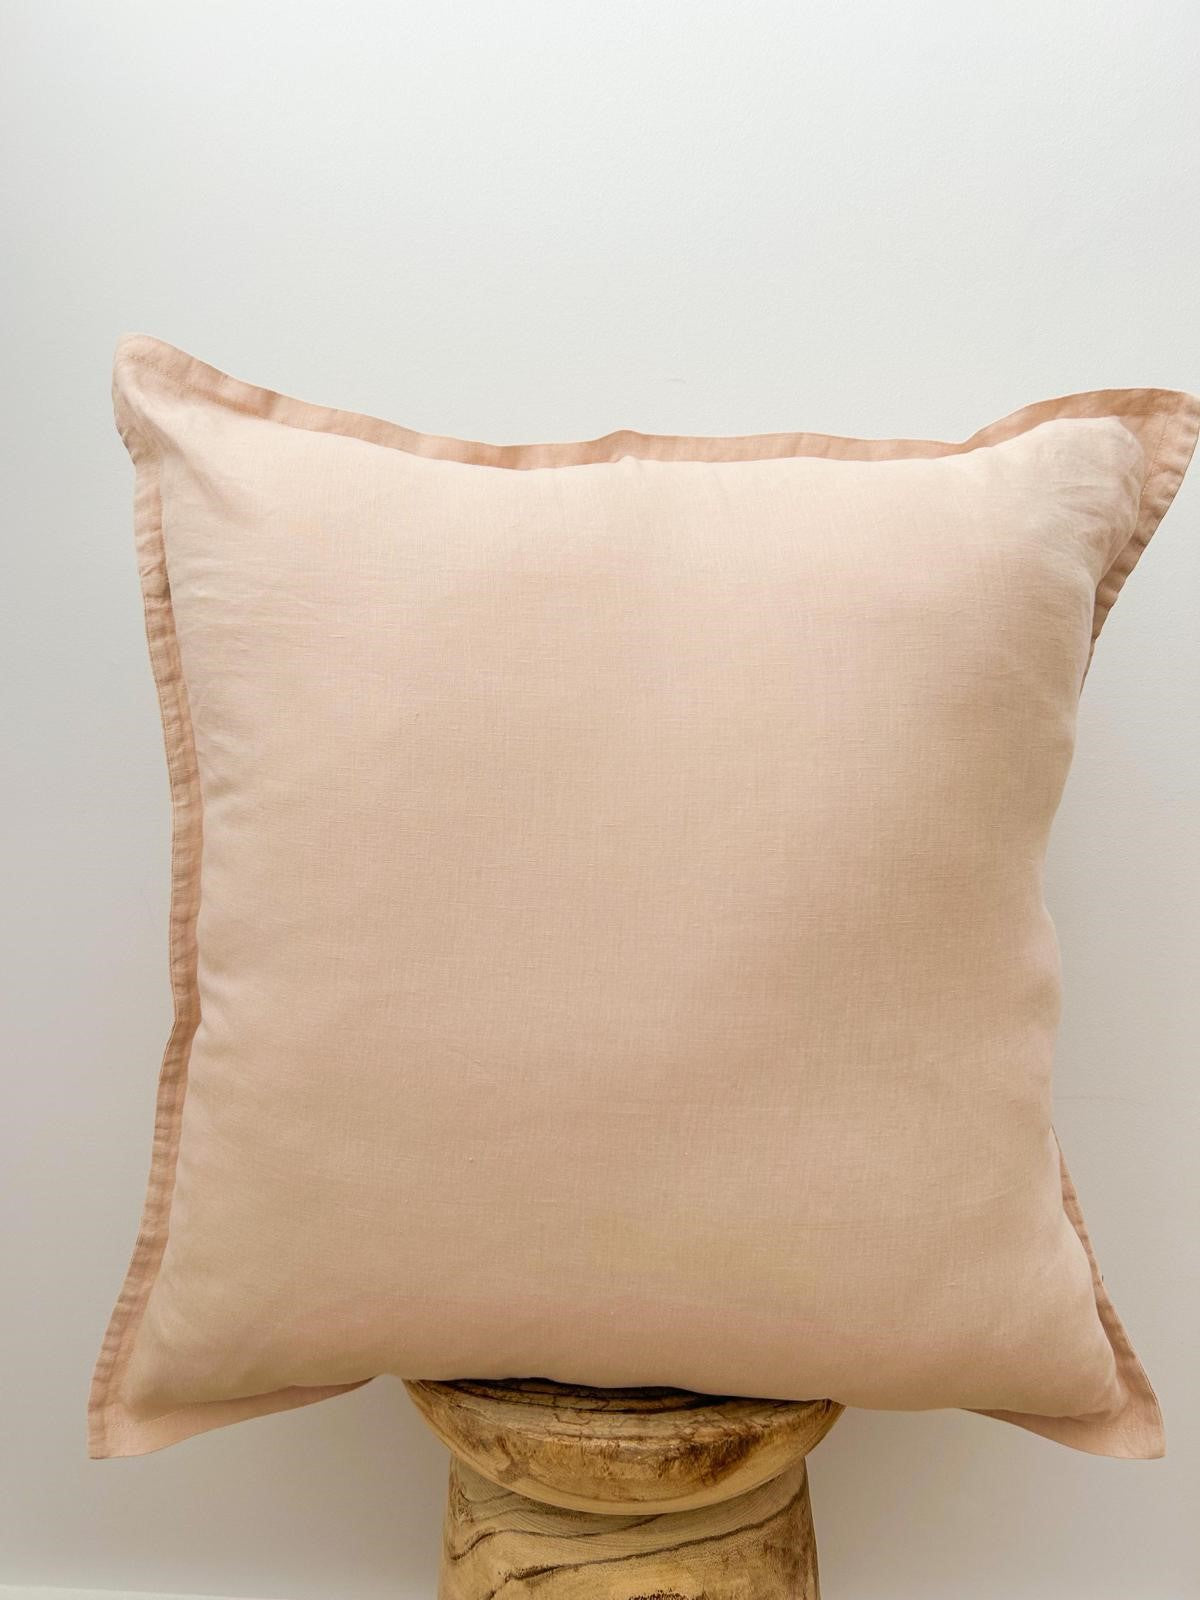 Pure French Linen Euro Cushion - Light Clay - 2 for $70